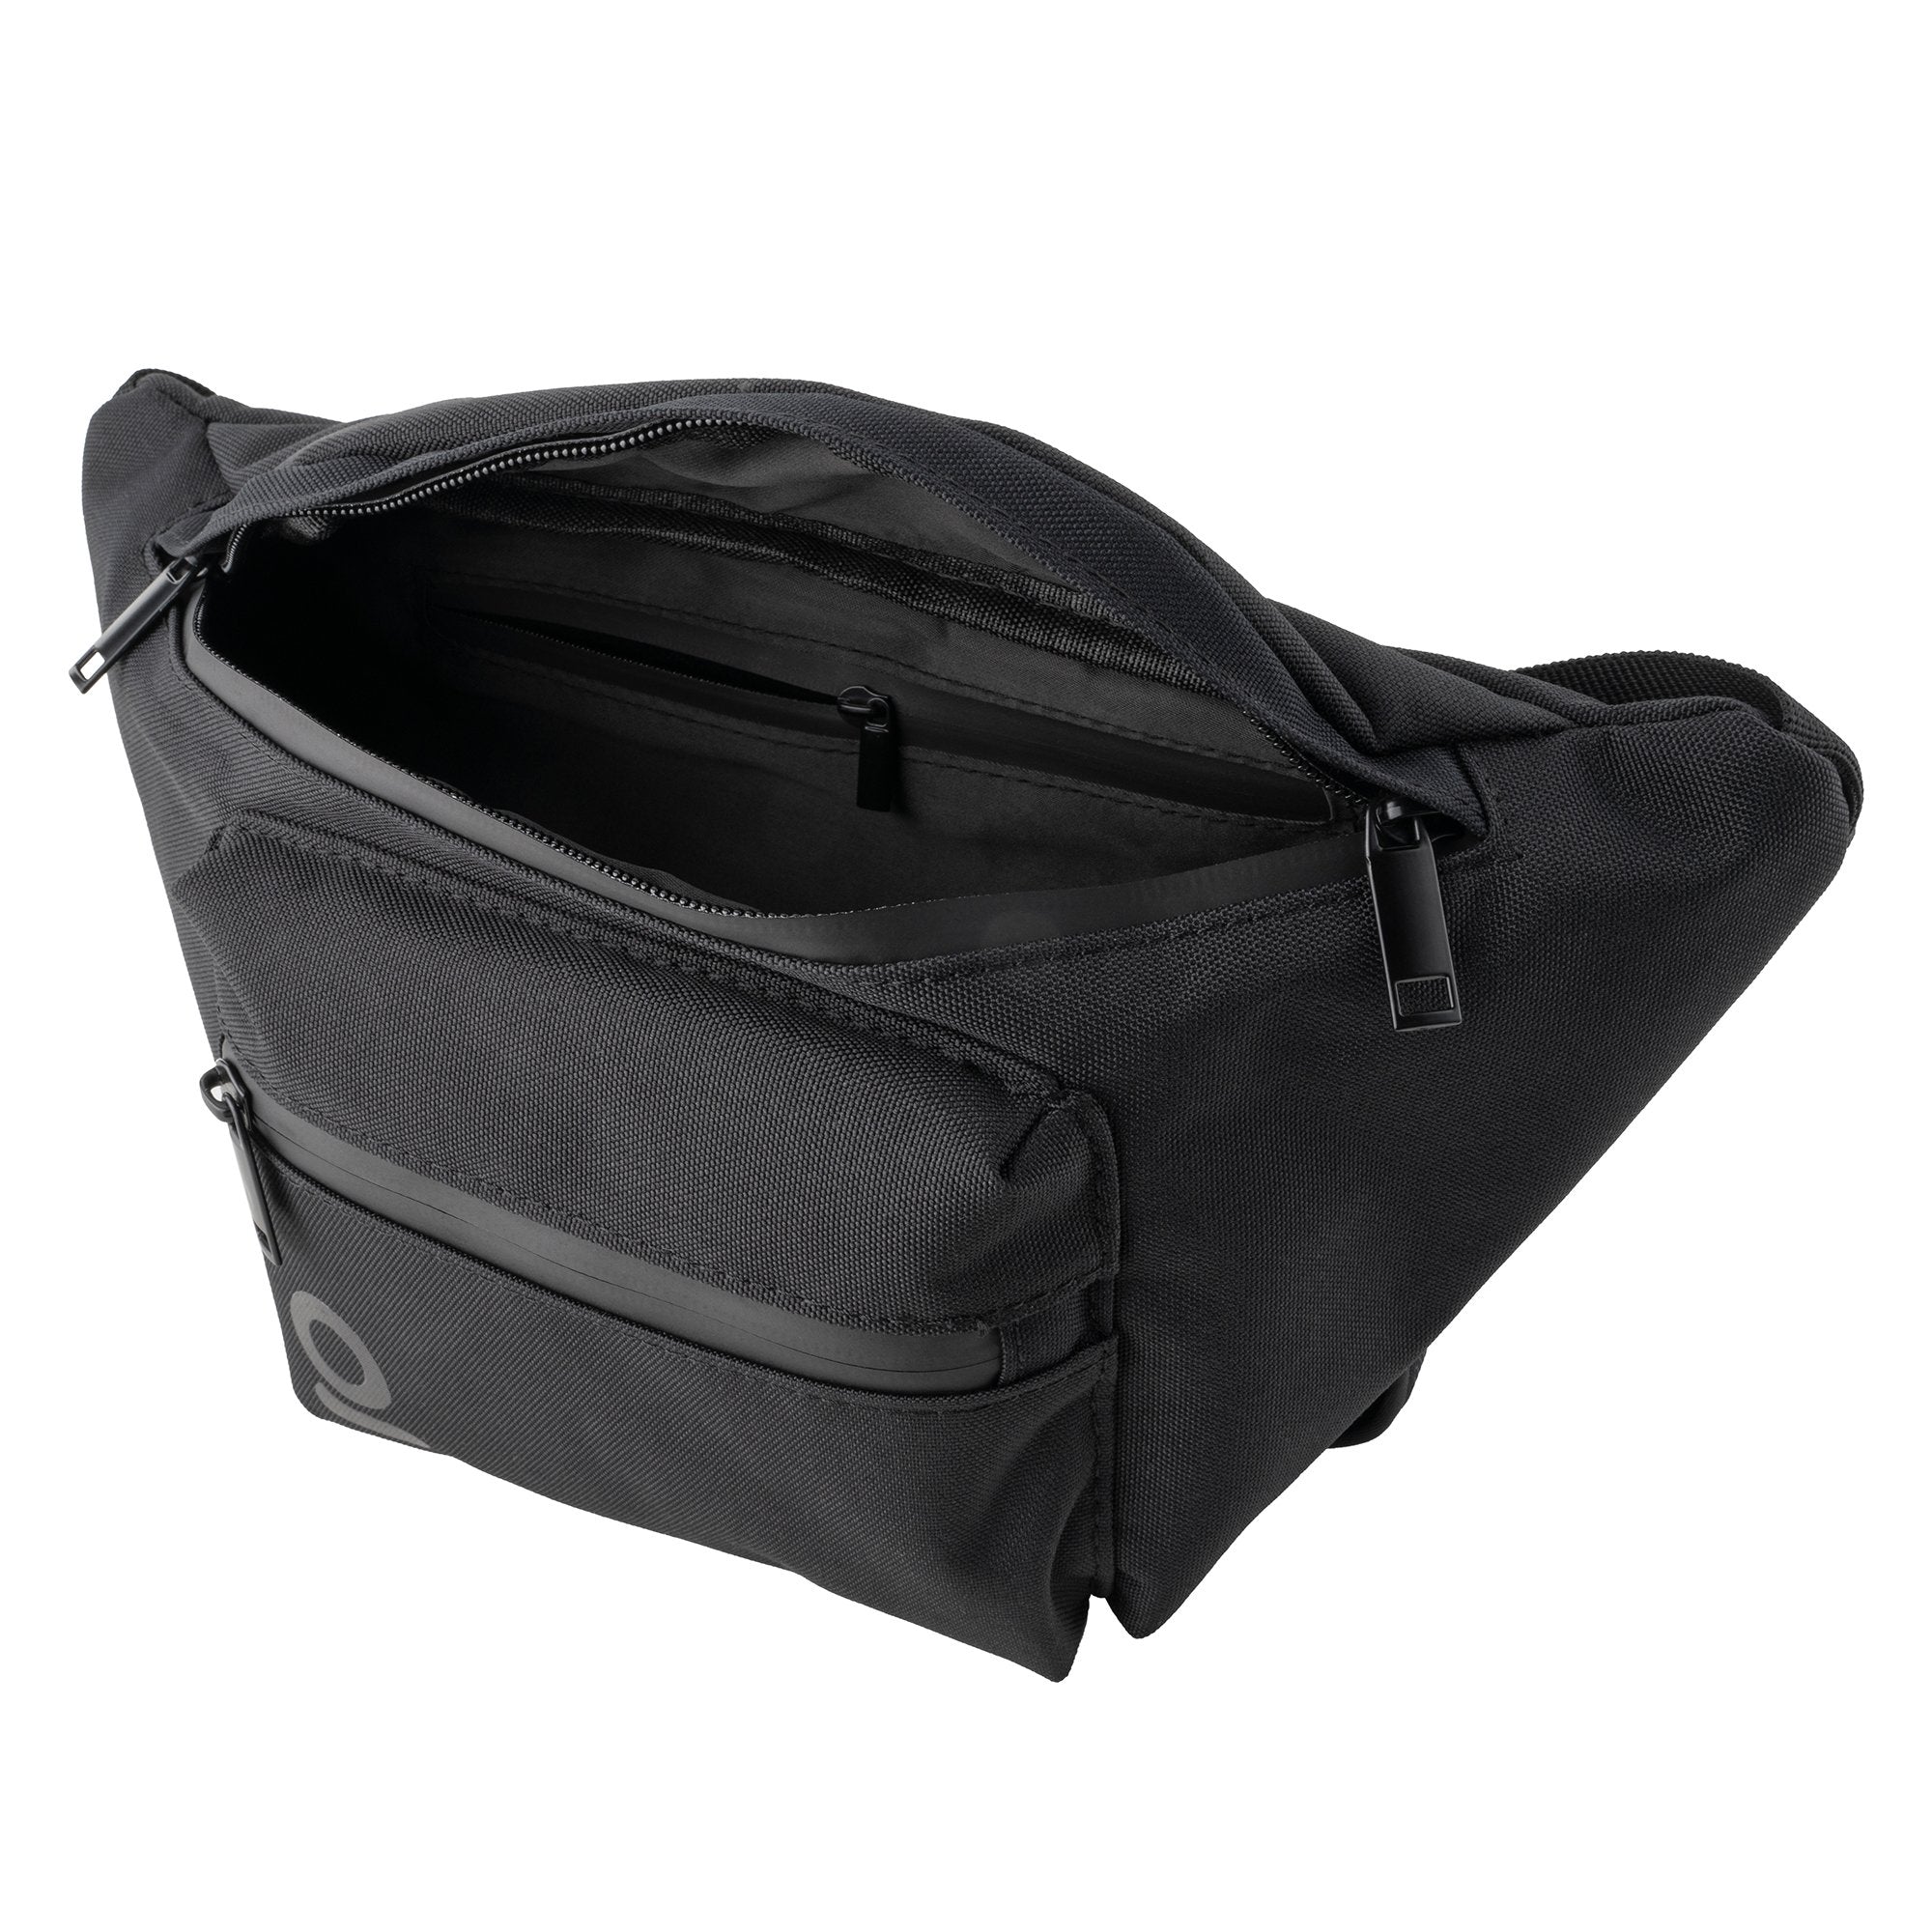 Ongrok Carbon-lined Smell Proof Fanny Pack / Travel Pouch